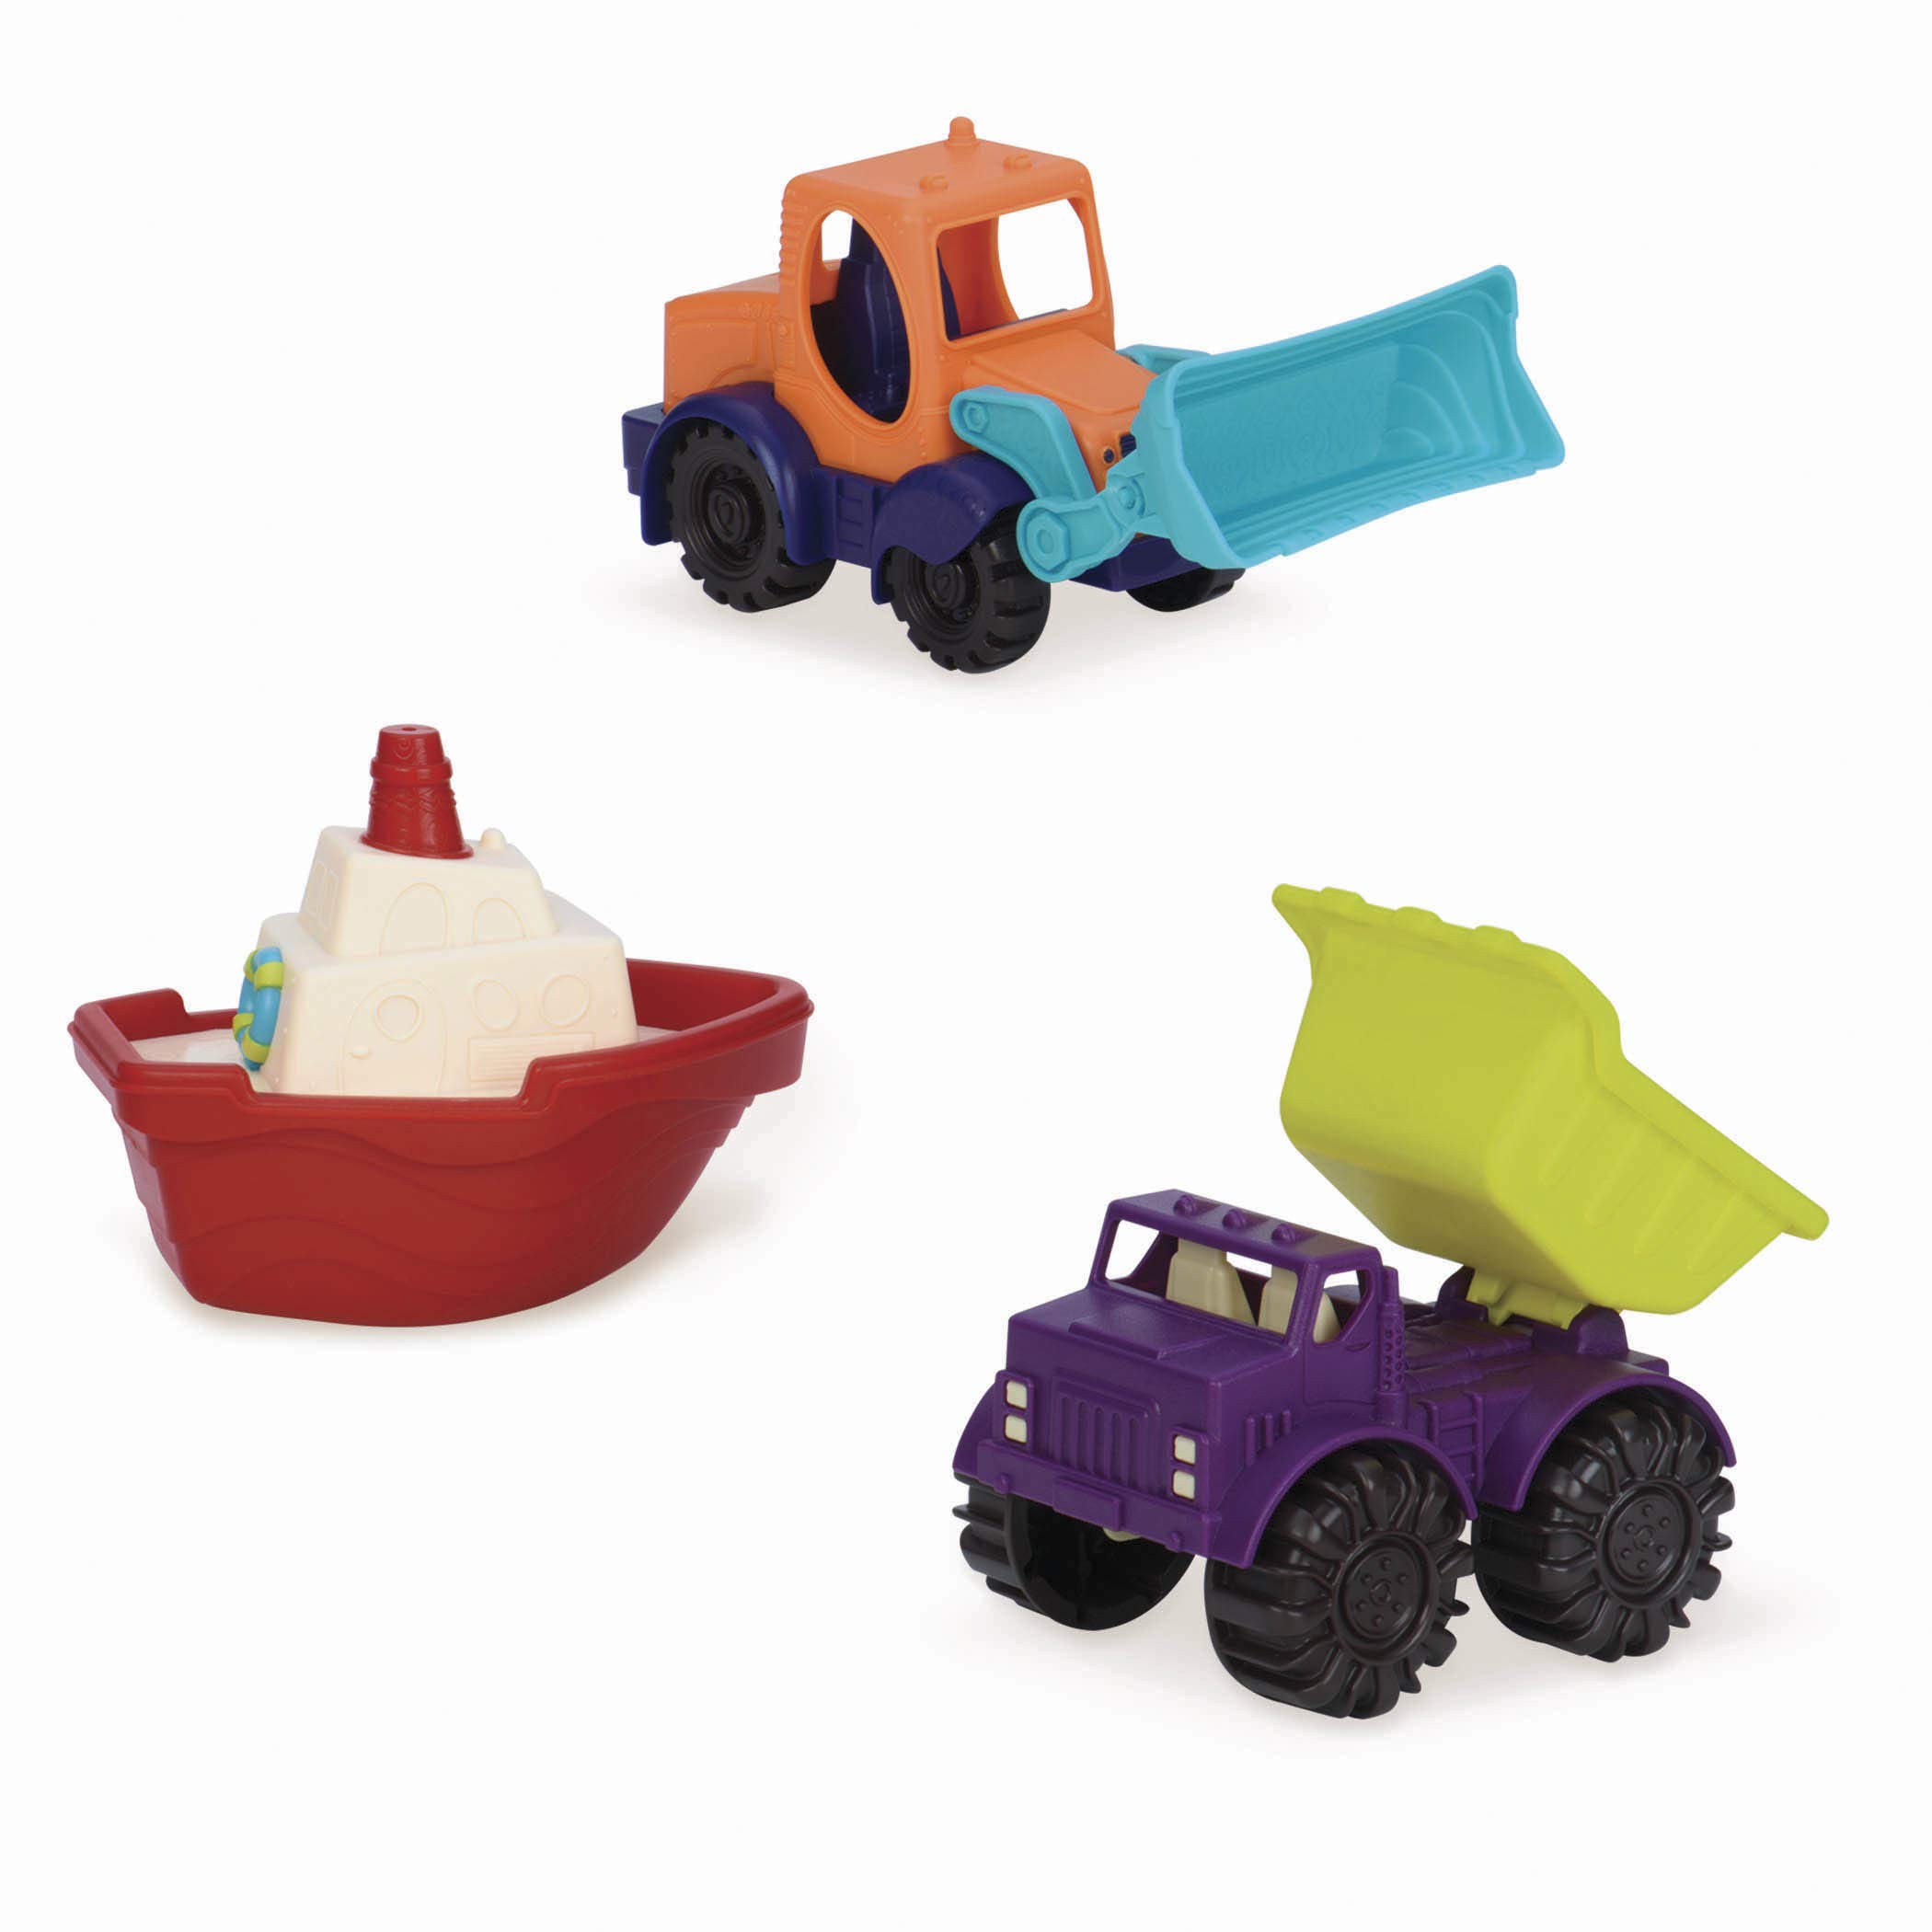 B. toys by Battat Mini Toy Cars - Water & Sand Vehicles Beach Playset for Kids 18 Months+ (3- Pcs)